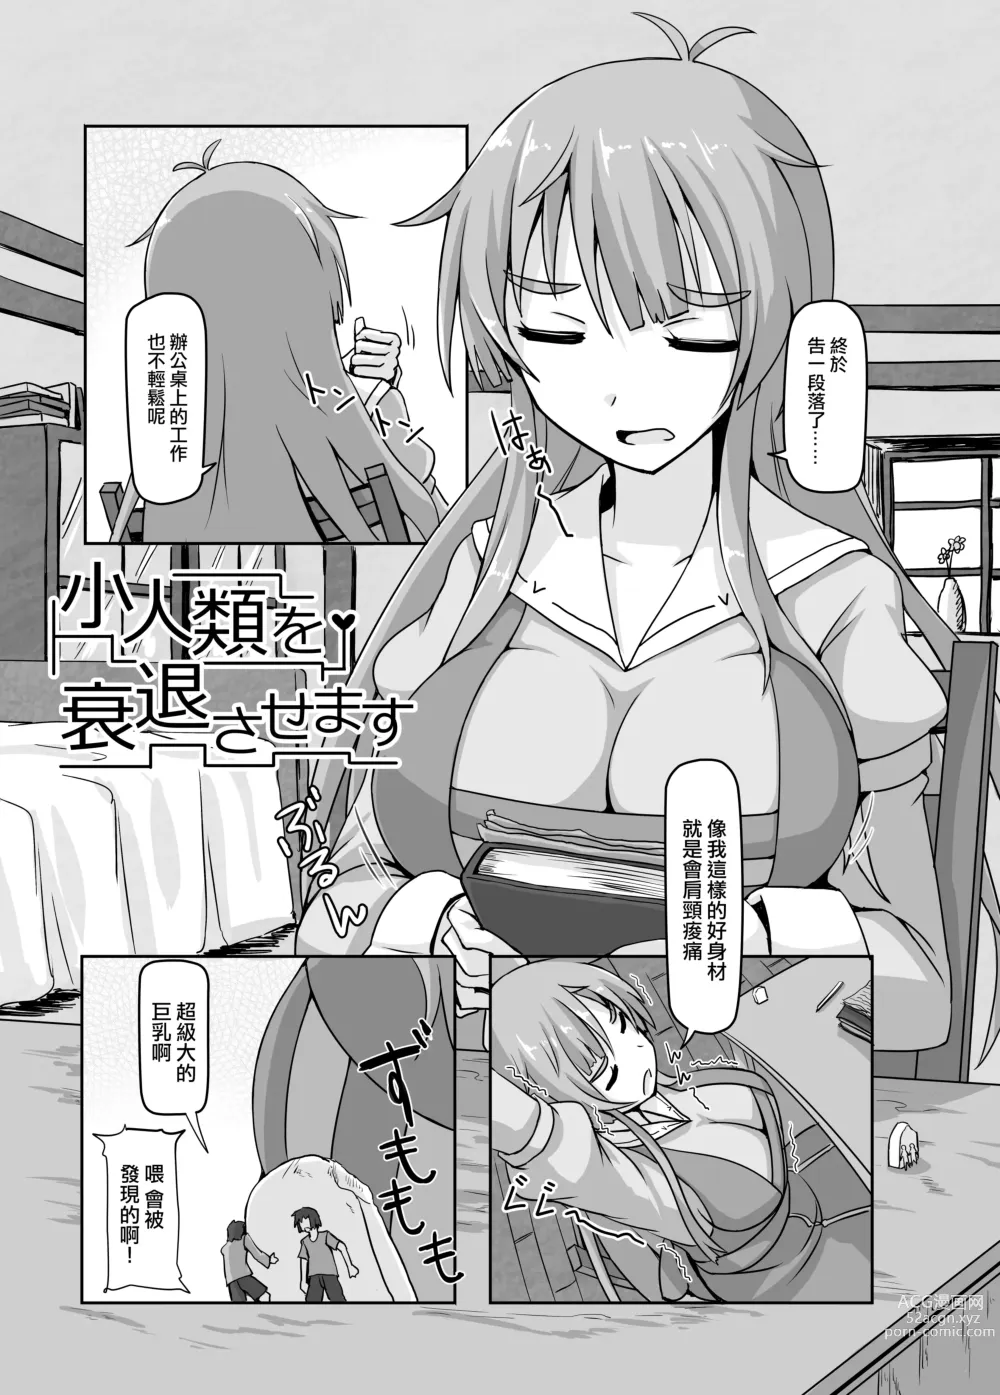 Page 4 of doujinshi 小小人類就由我來衰退